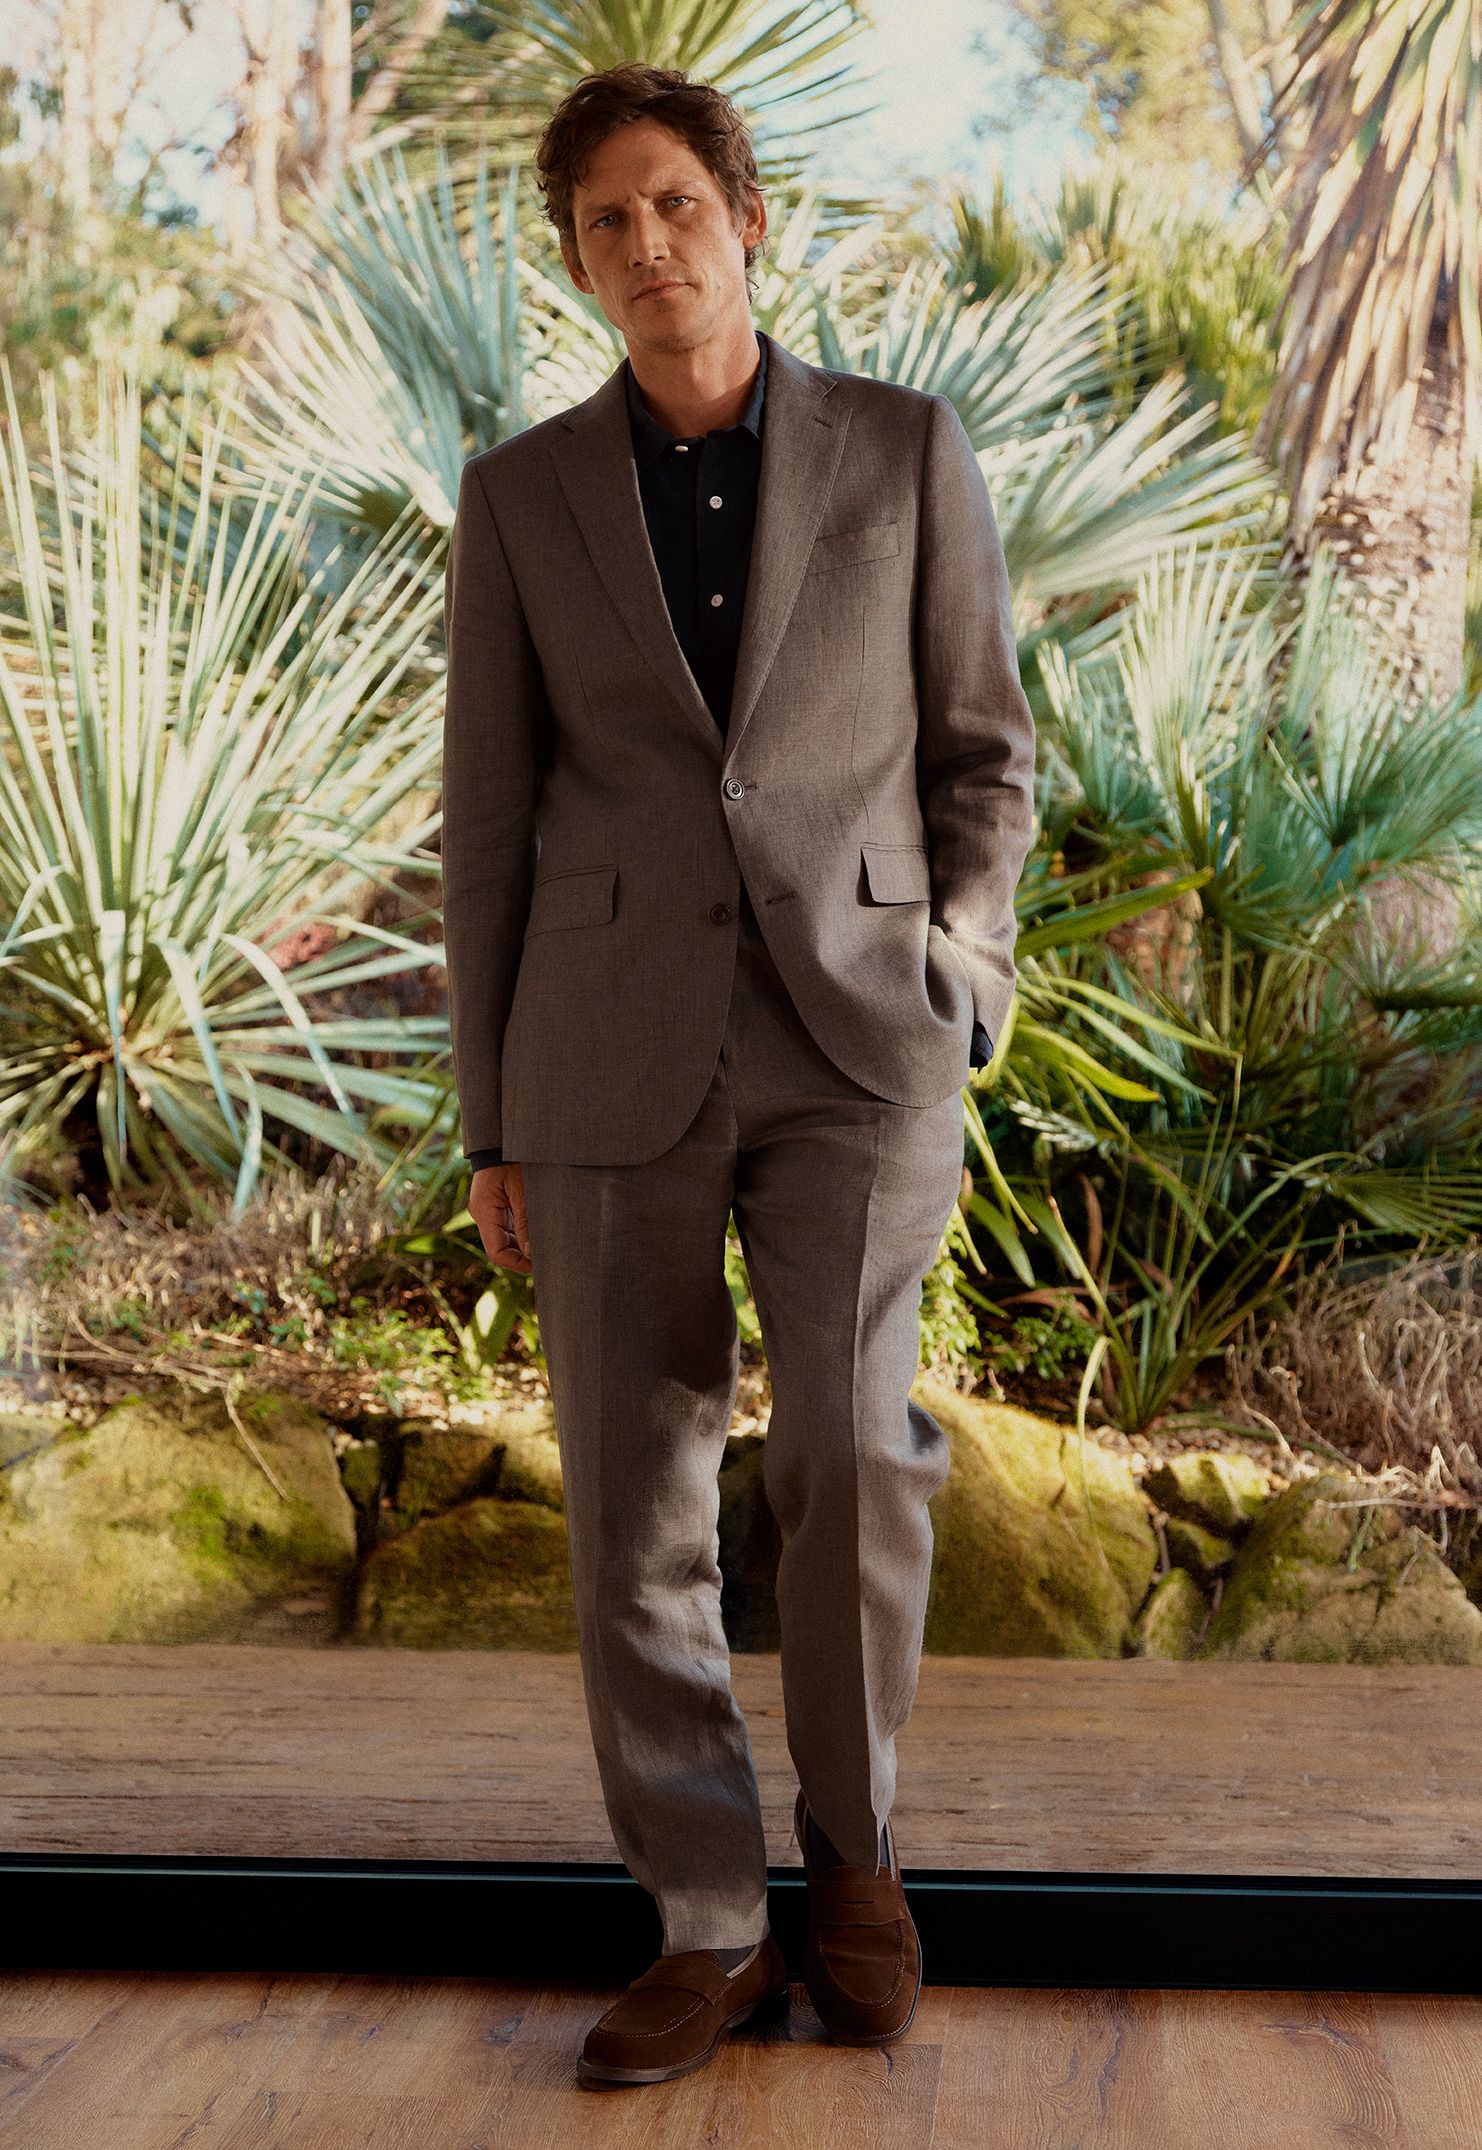 Image of a man in a tailored suit standing in-front of a jungle background